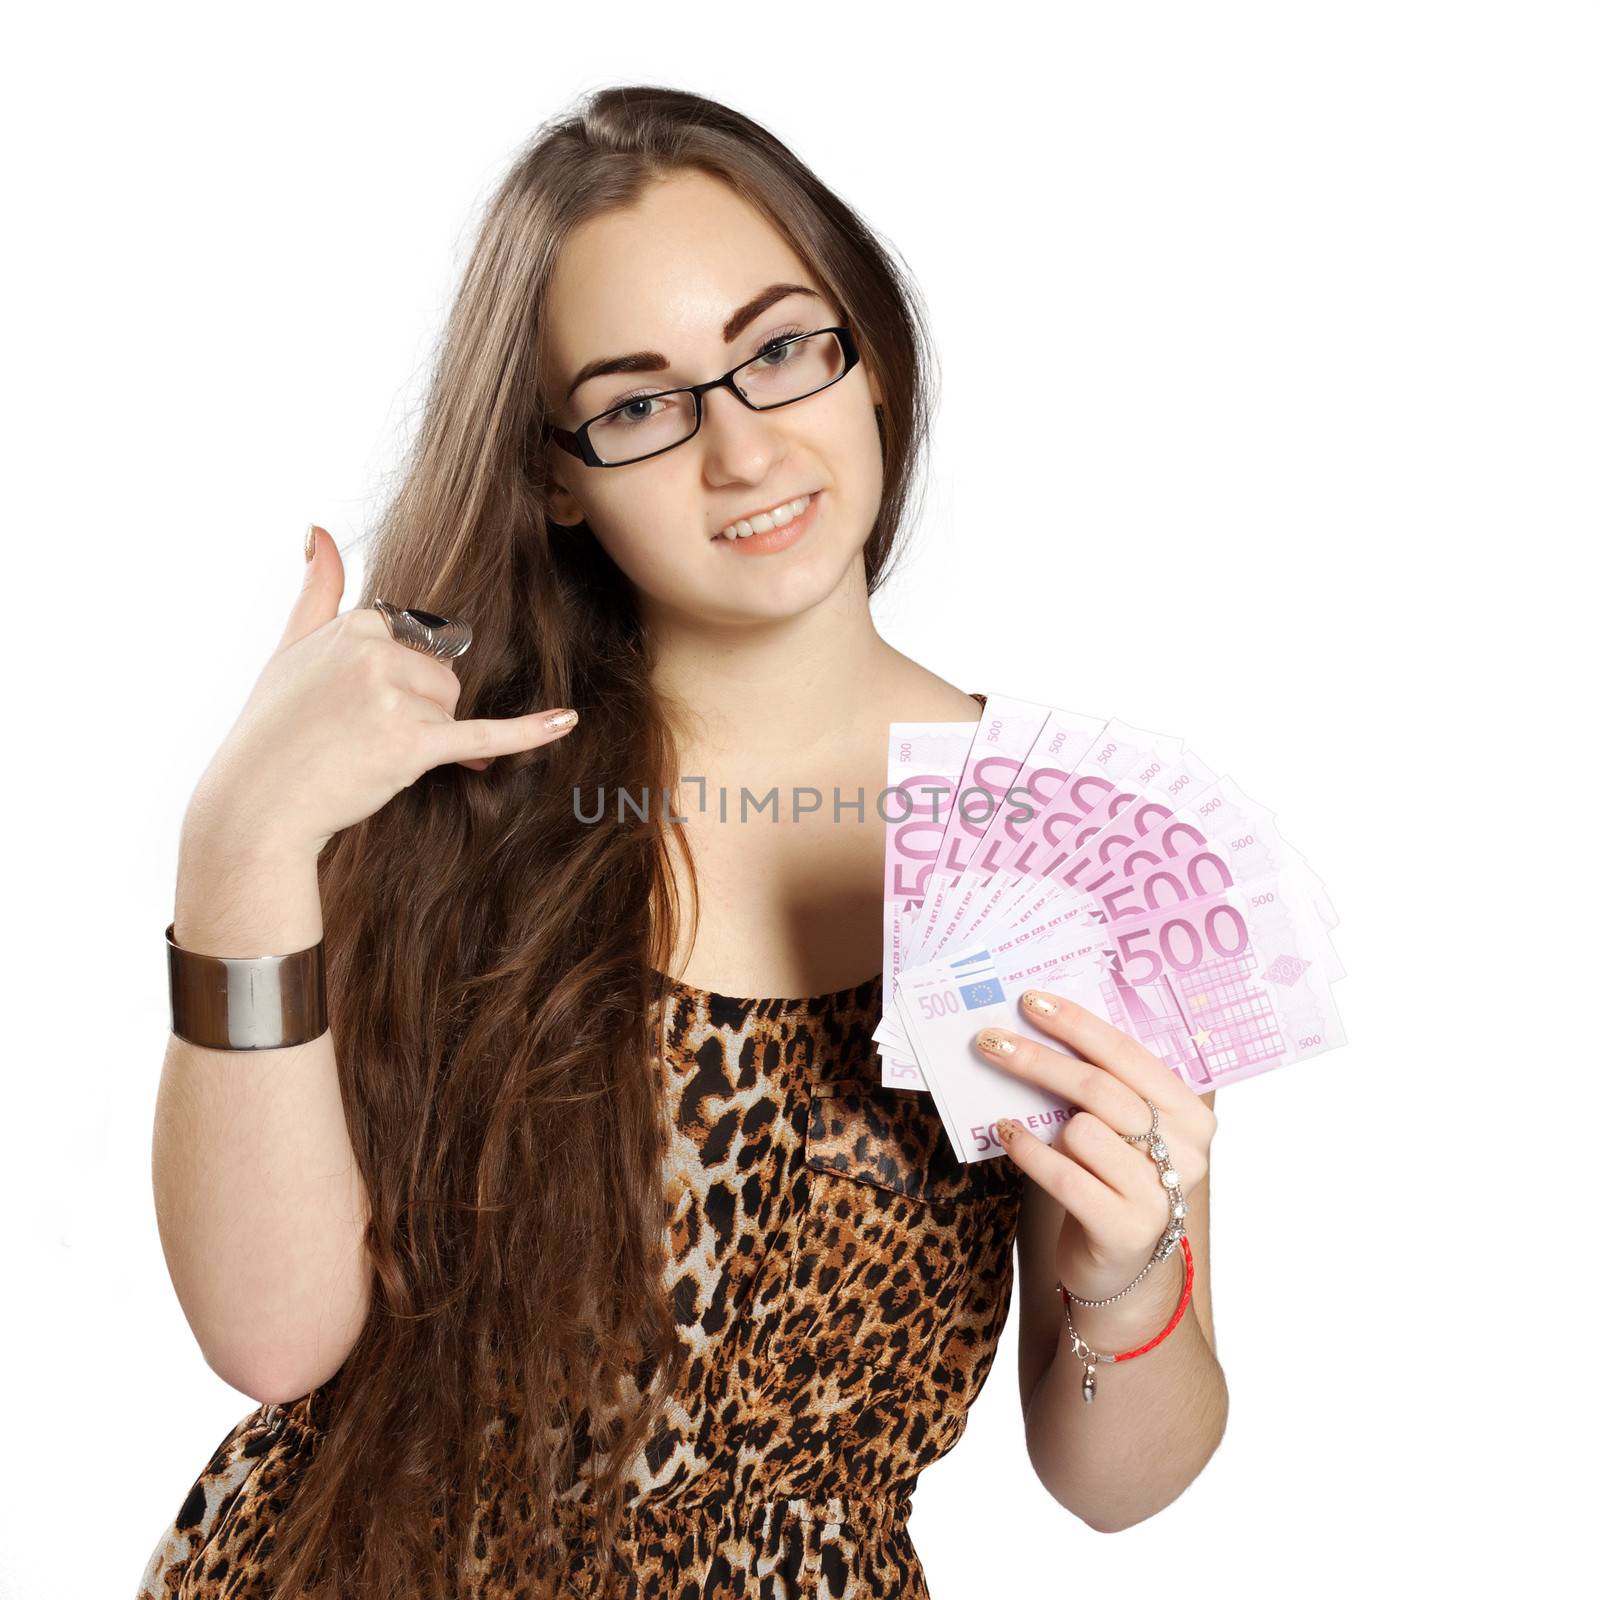 Long-haired teenager girl in leopard dress holding in hand euro as a fan and the other hand shows give me a call, isolated on white background